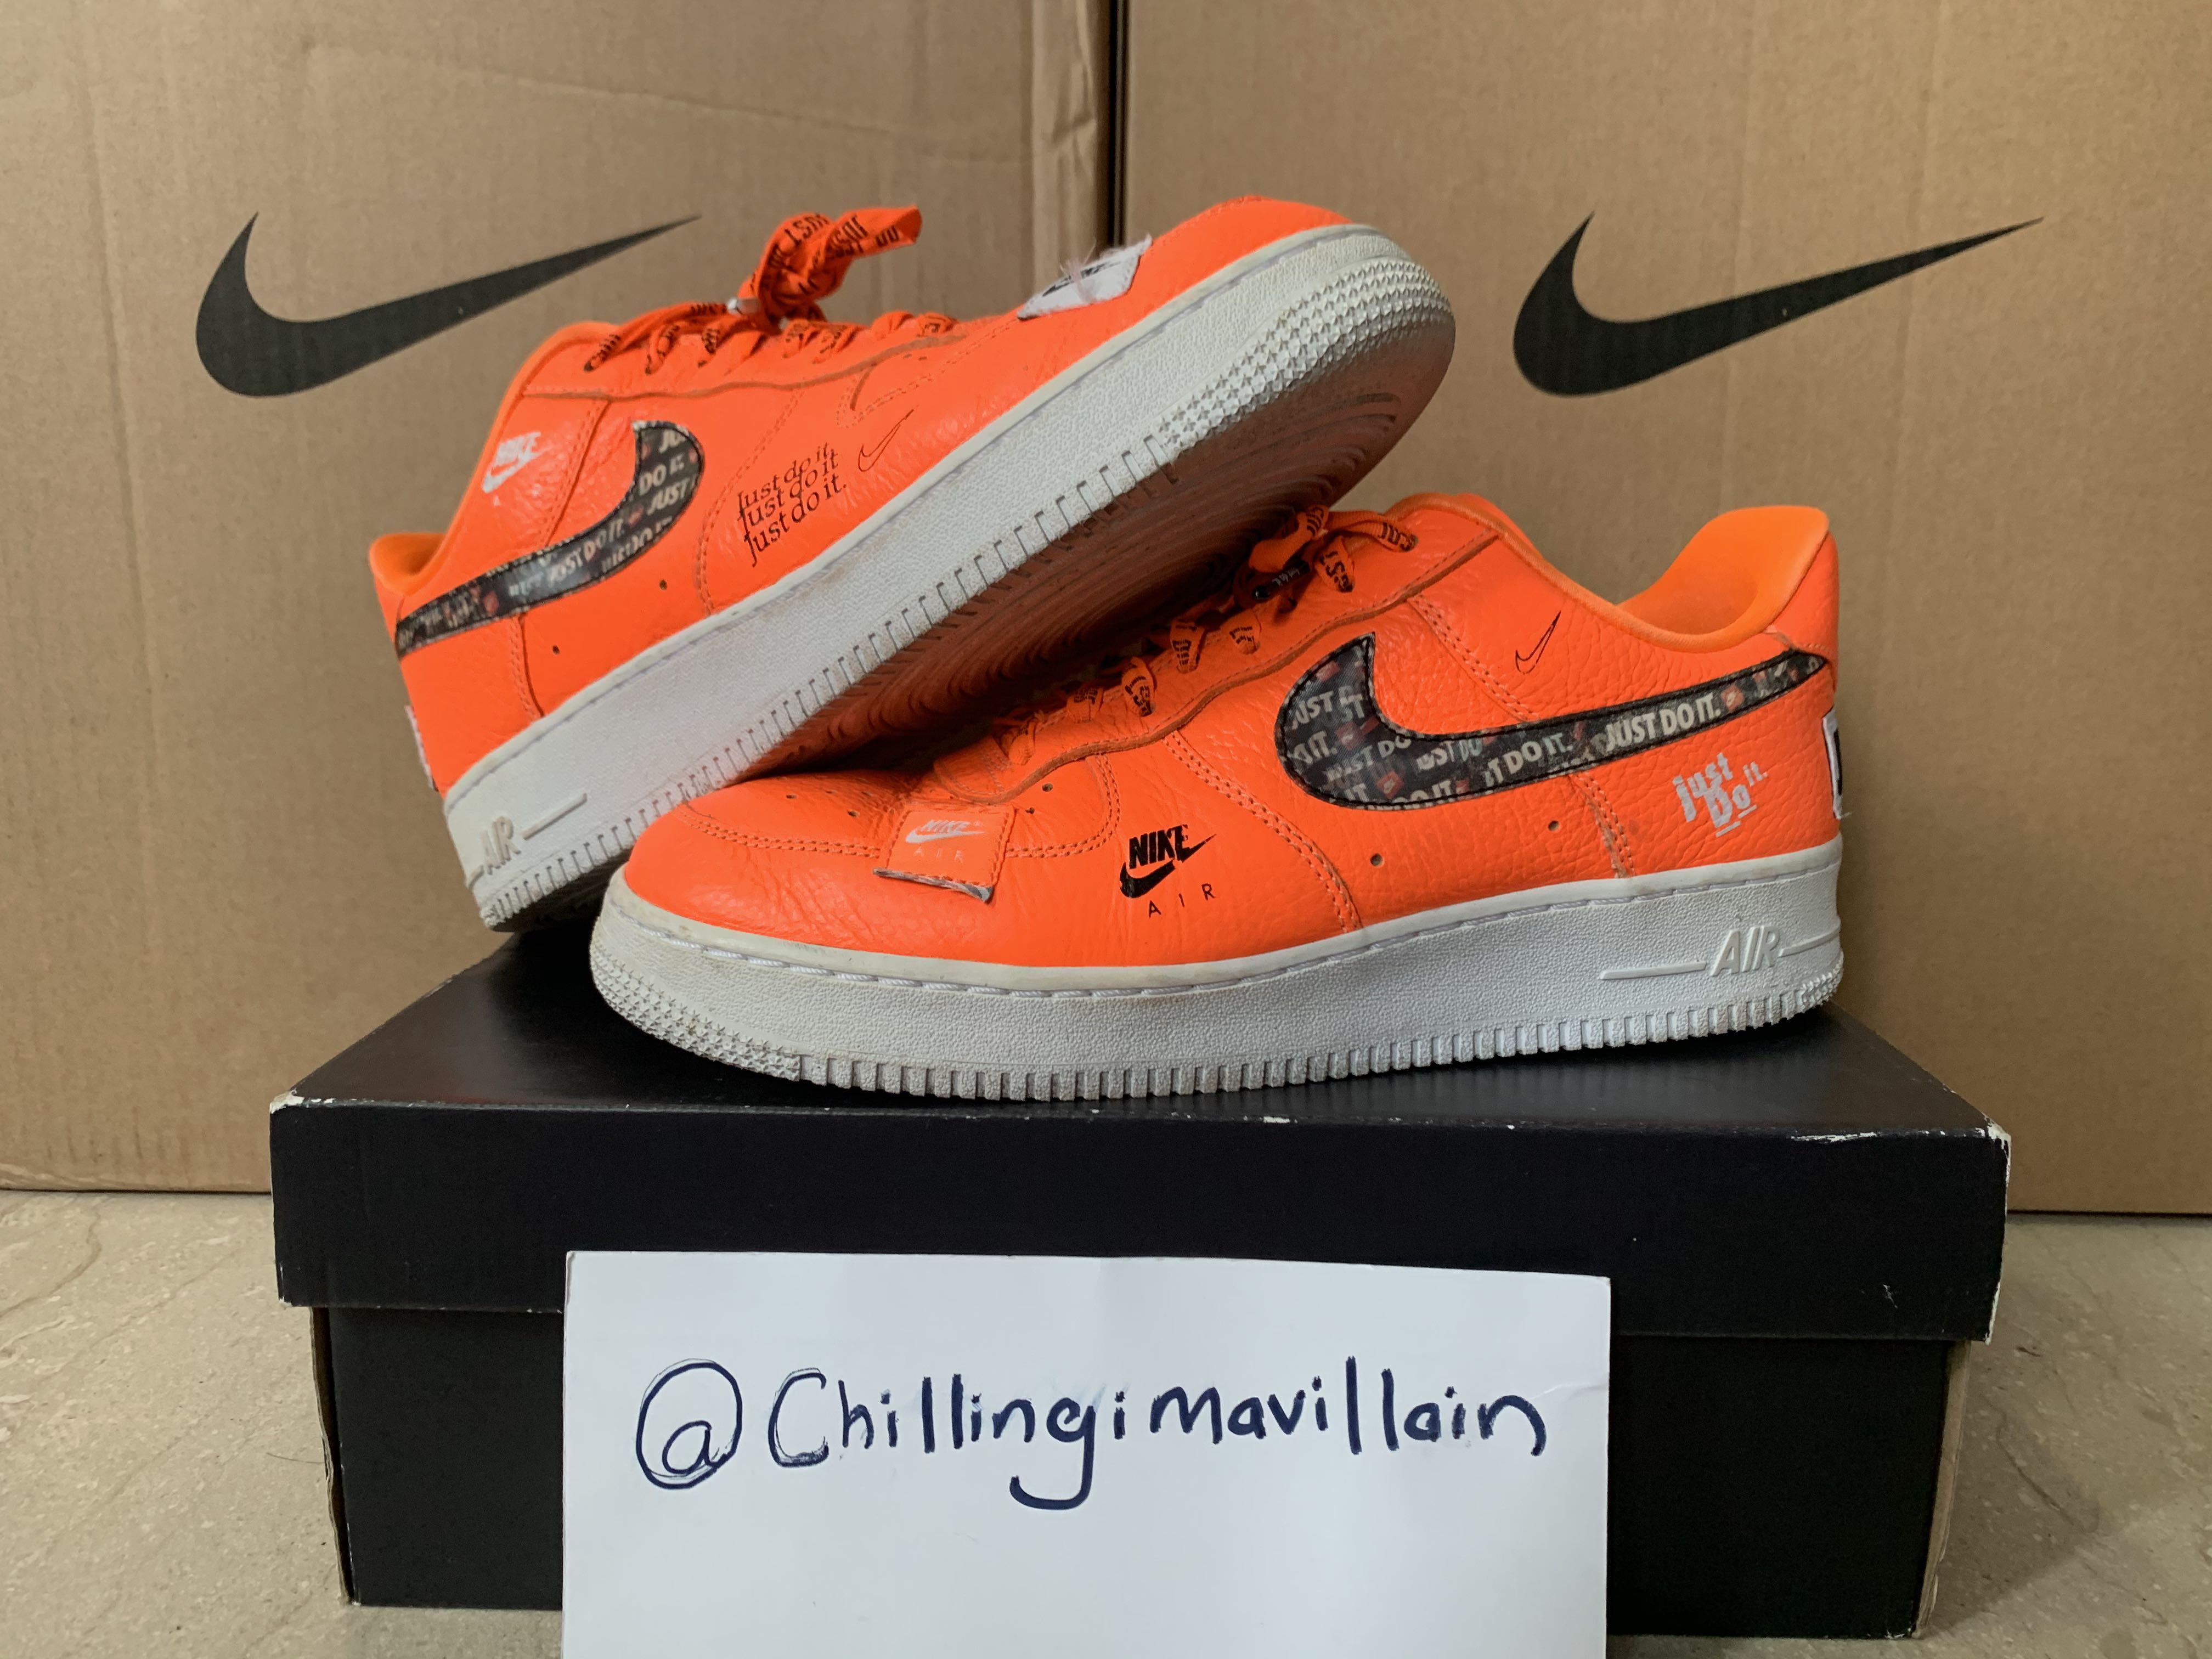 nike air force 1 07 just do it pack orange